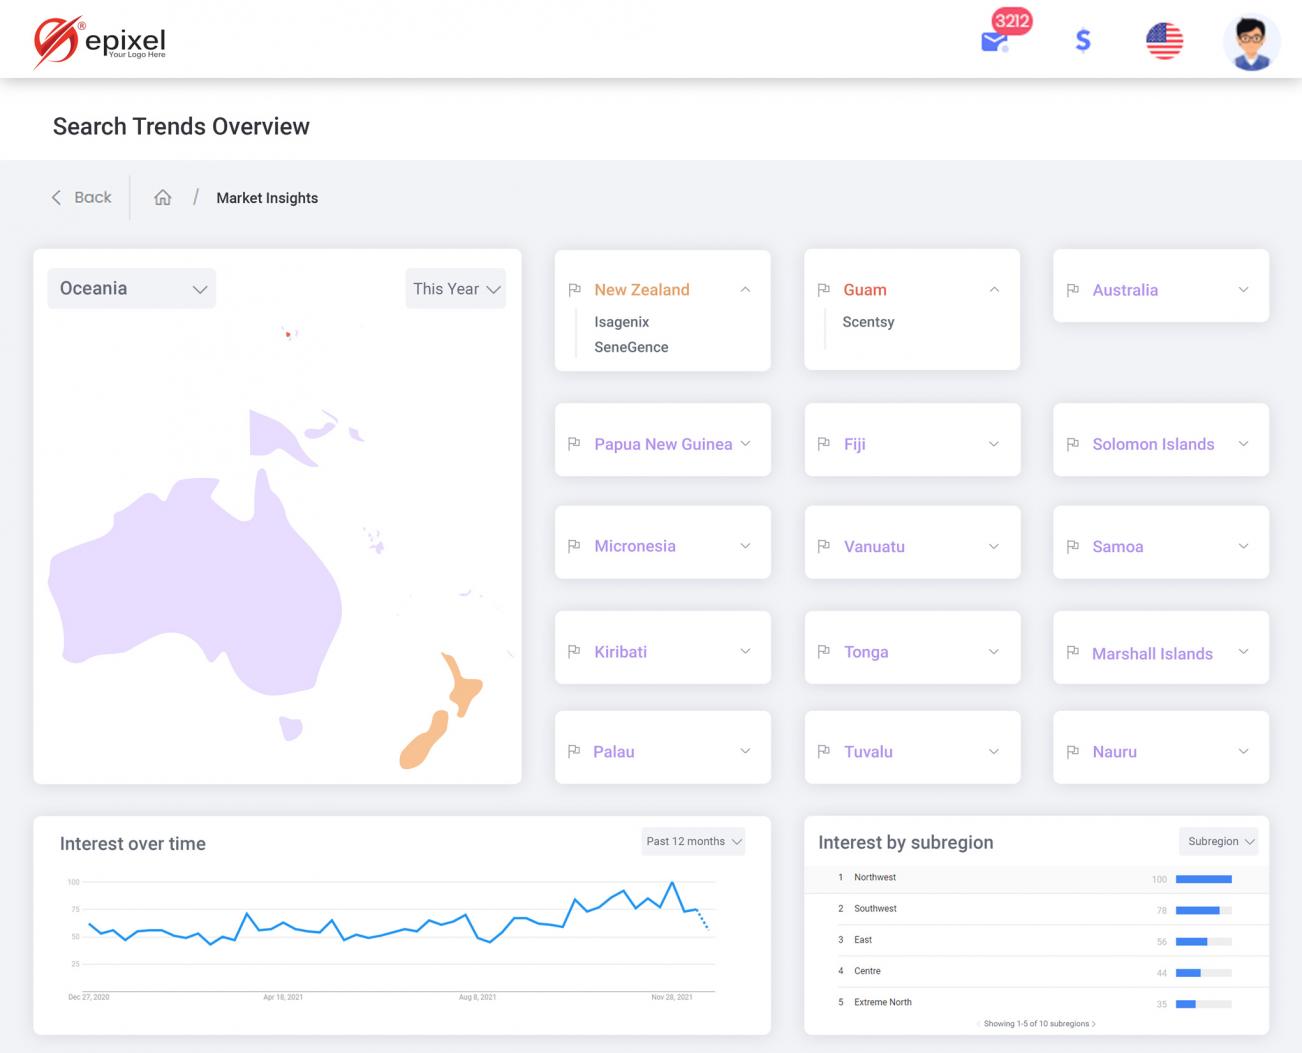 Direct selling search trends in Oceania